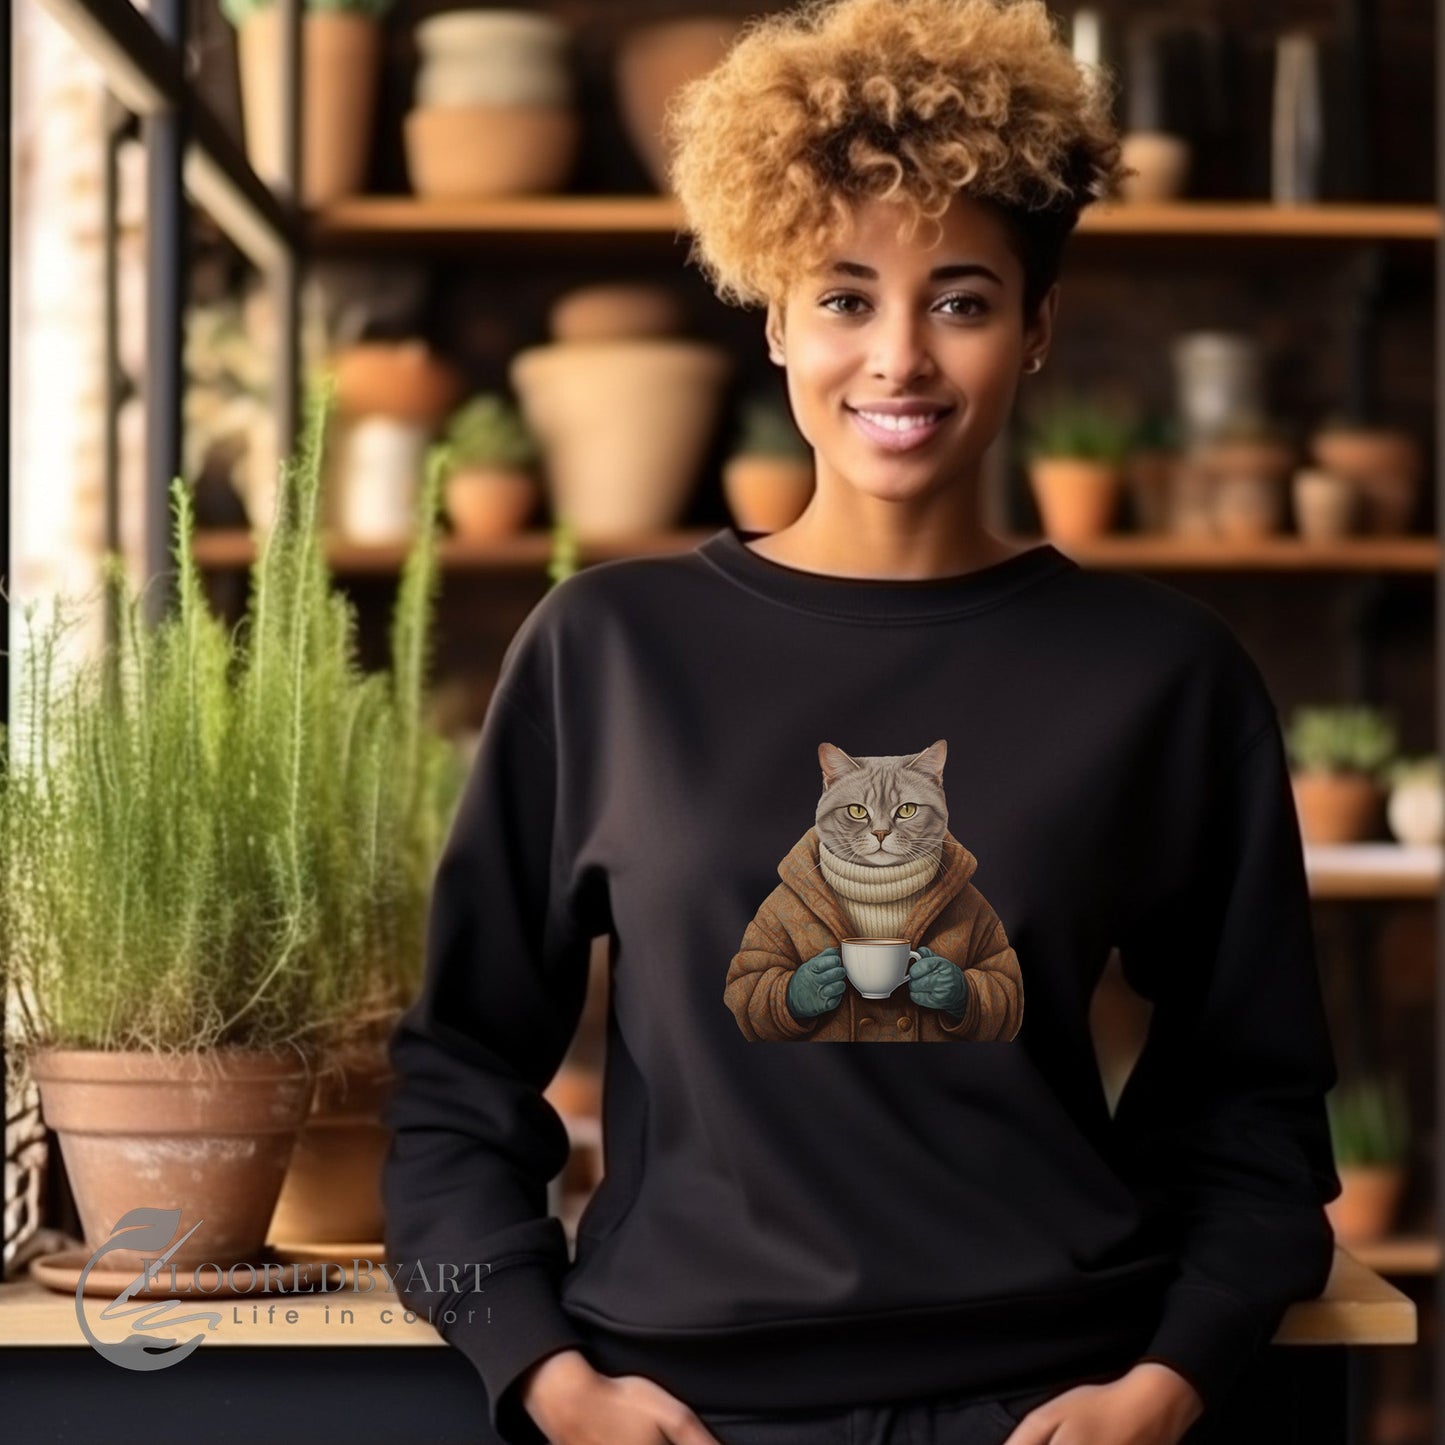 Cats and Coffee, Cats in Sweaters Sweatshirt, Cute Artistic Illustration - FlooredByArt